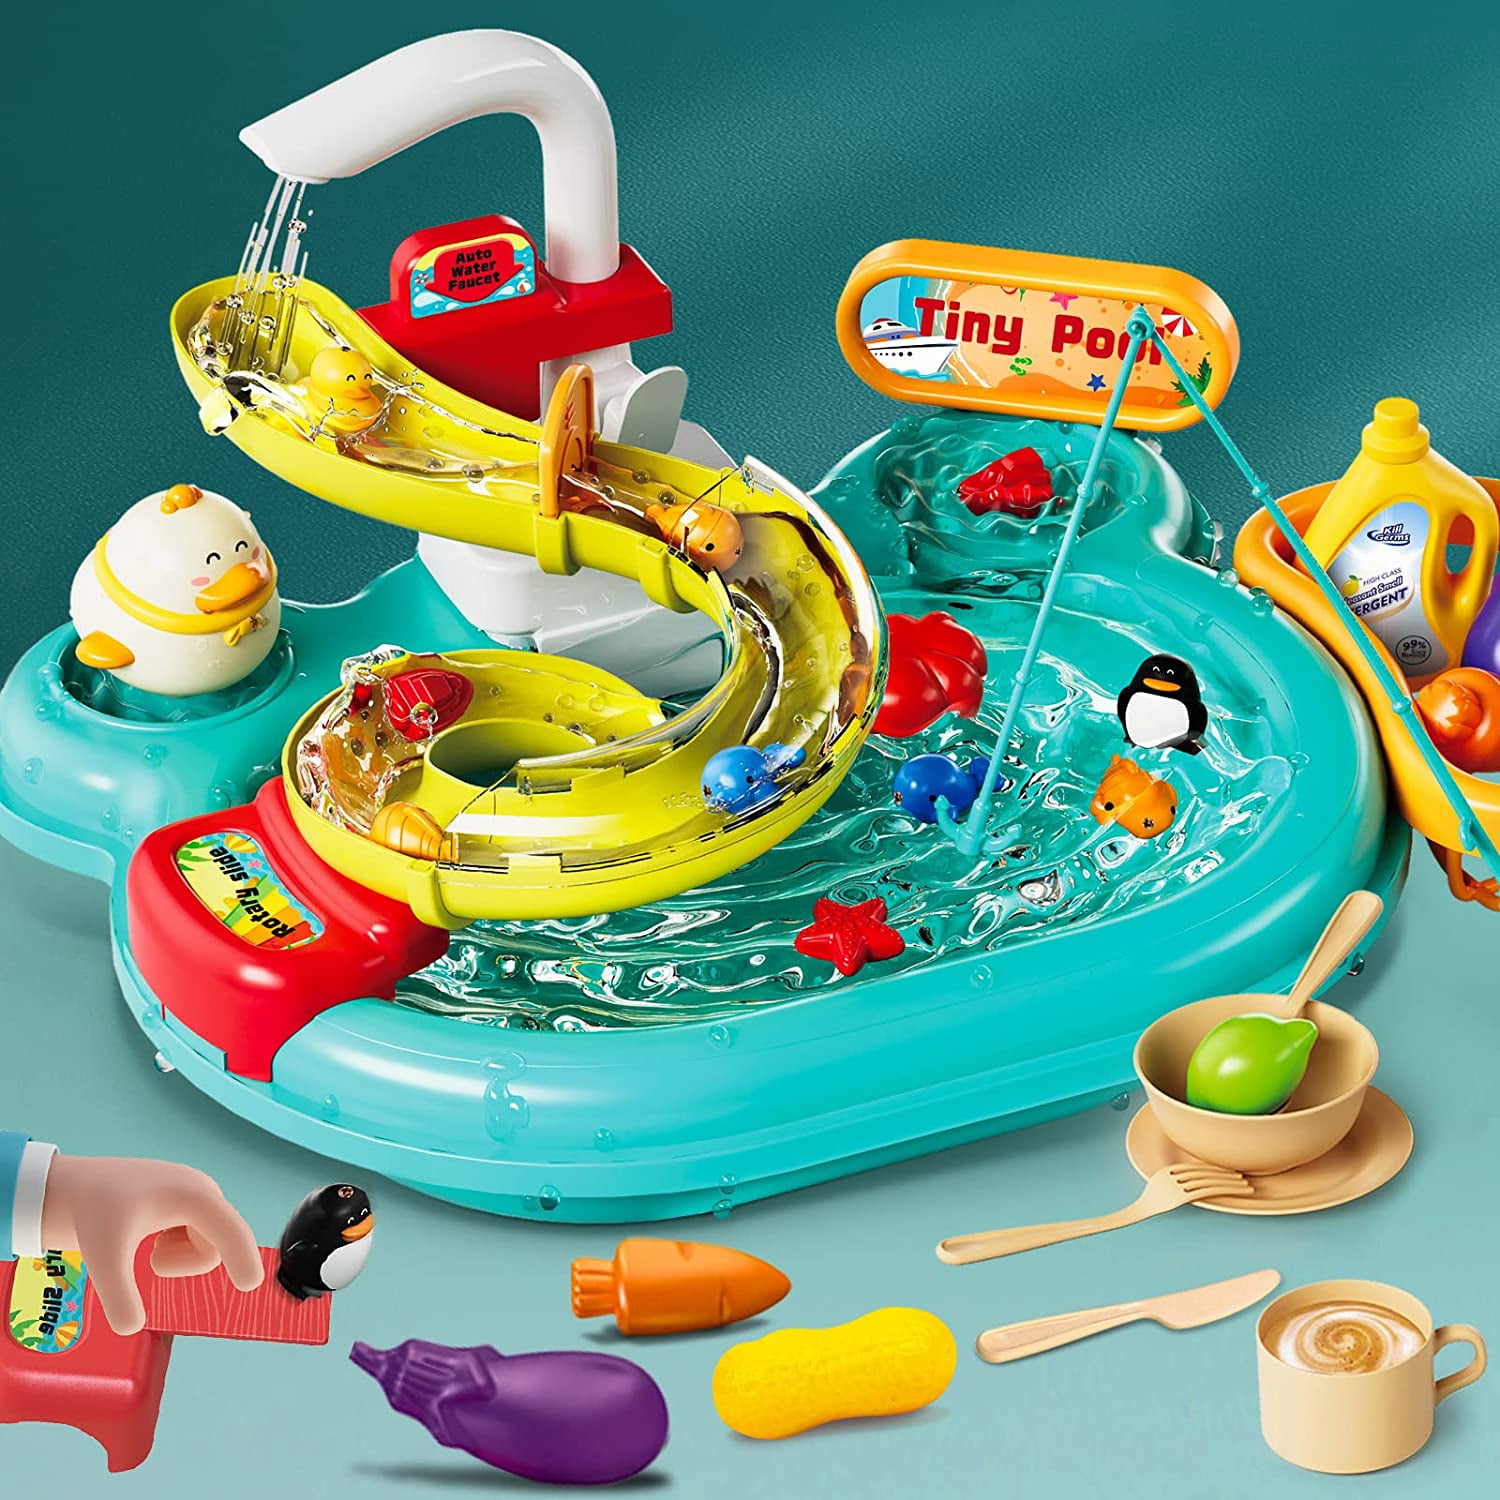 Beefunni Kitchen Sink Toys, Children Electric Dishwasher Playing Toy with Running Water,2 in 1 Fishing Pool Toys Pretend Role Play Toys for Boys Girls 3 Years and Up